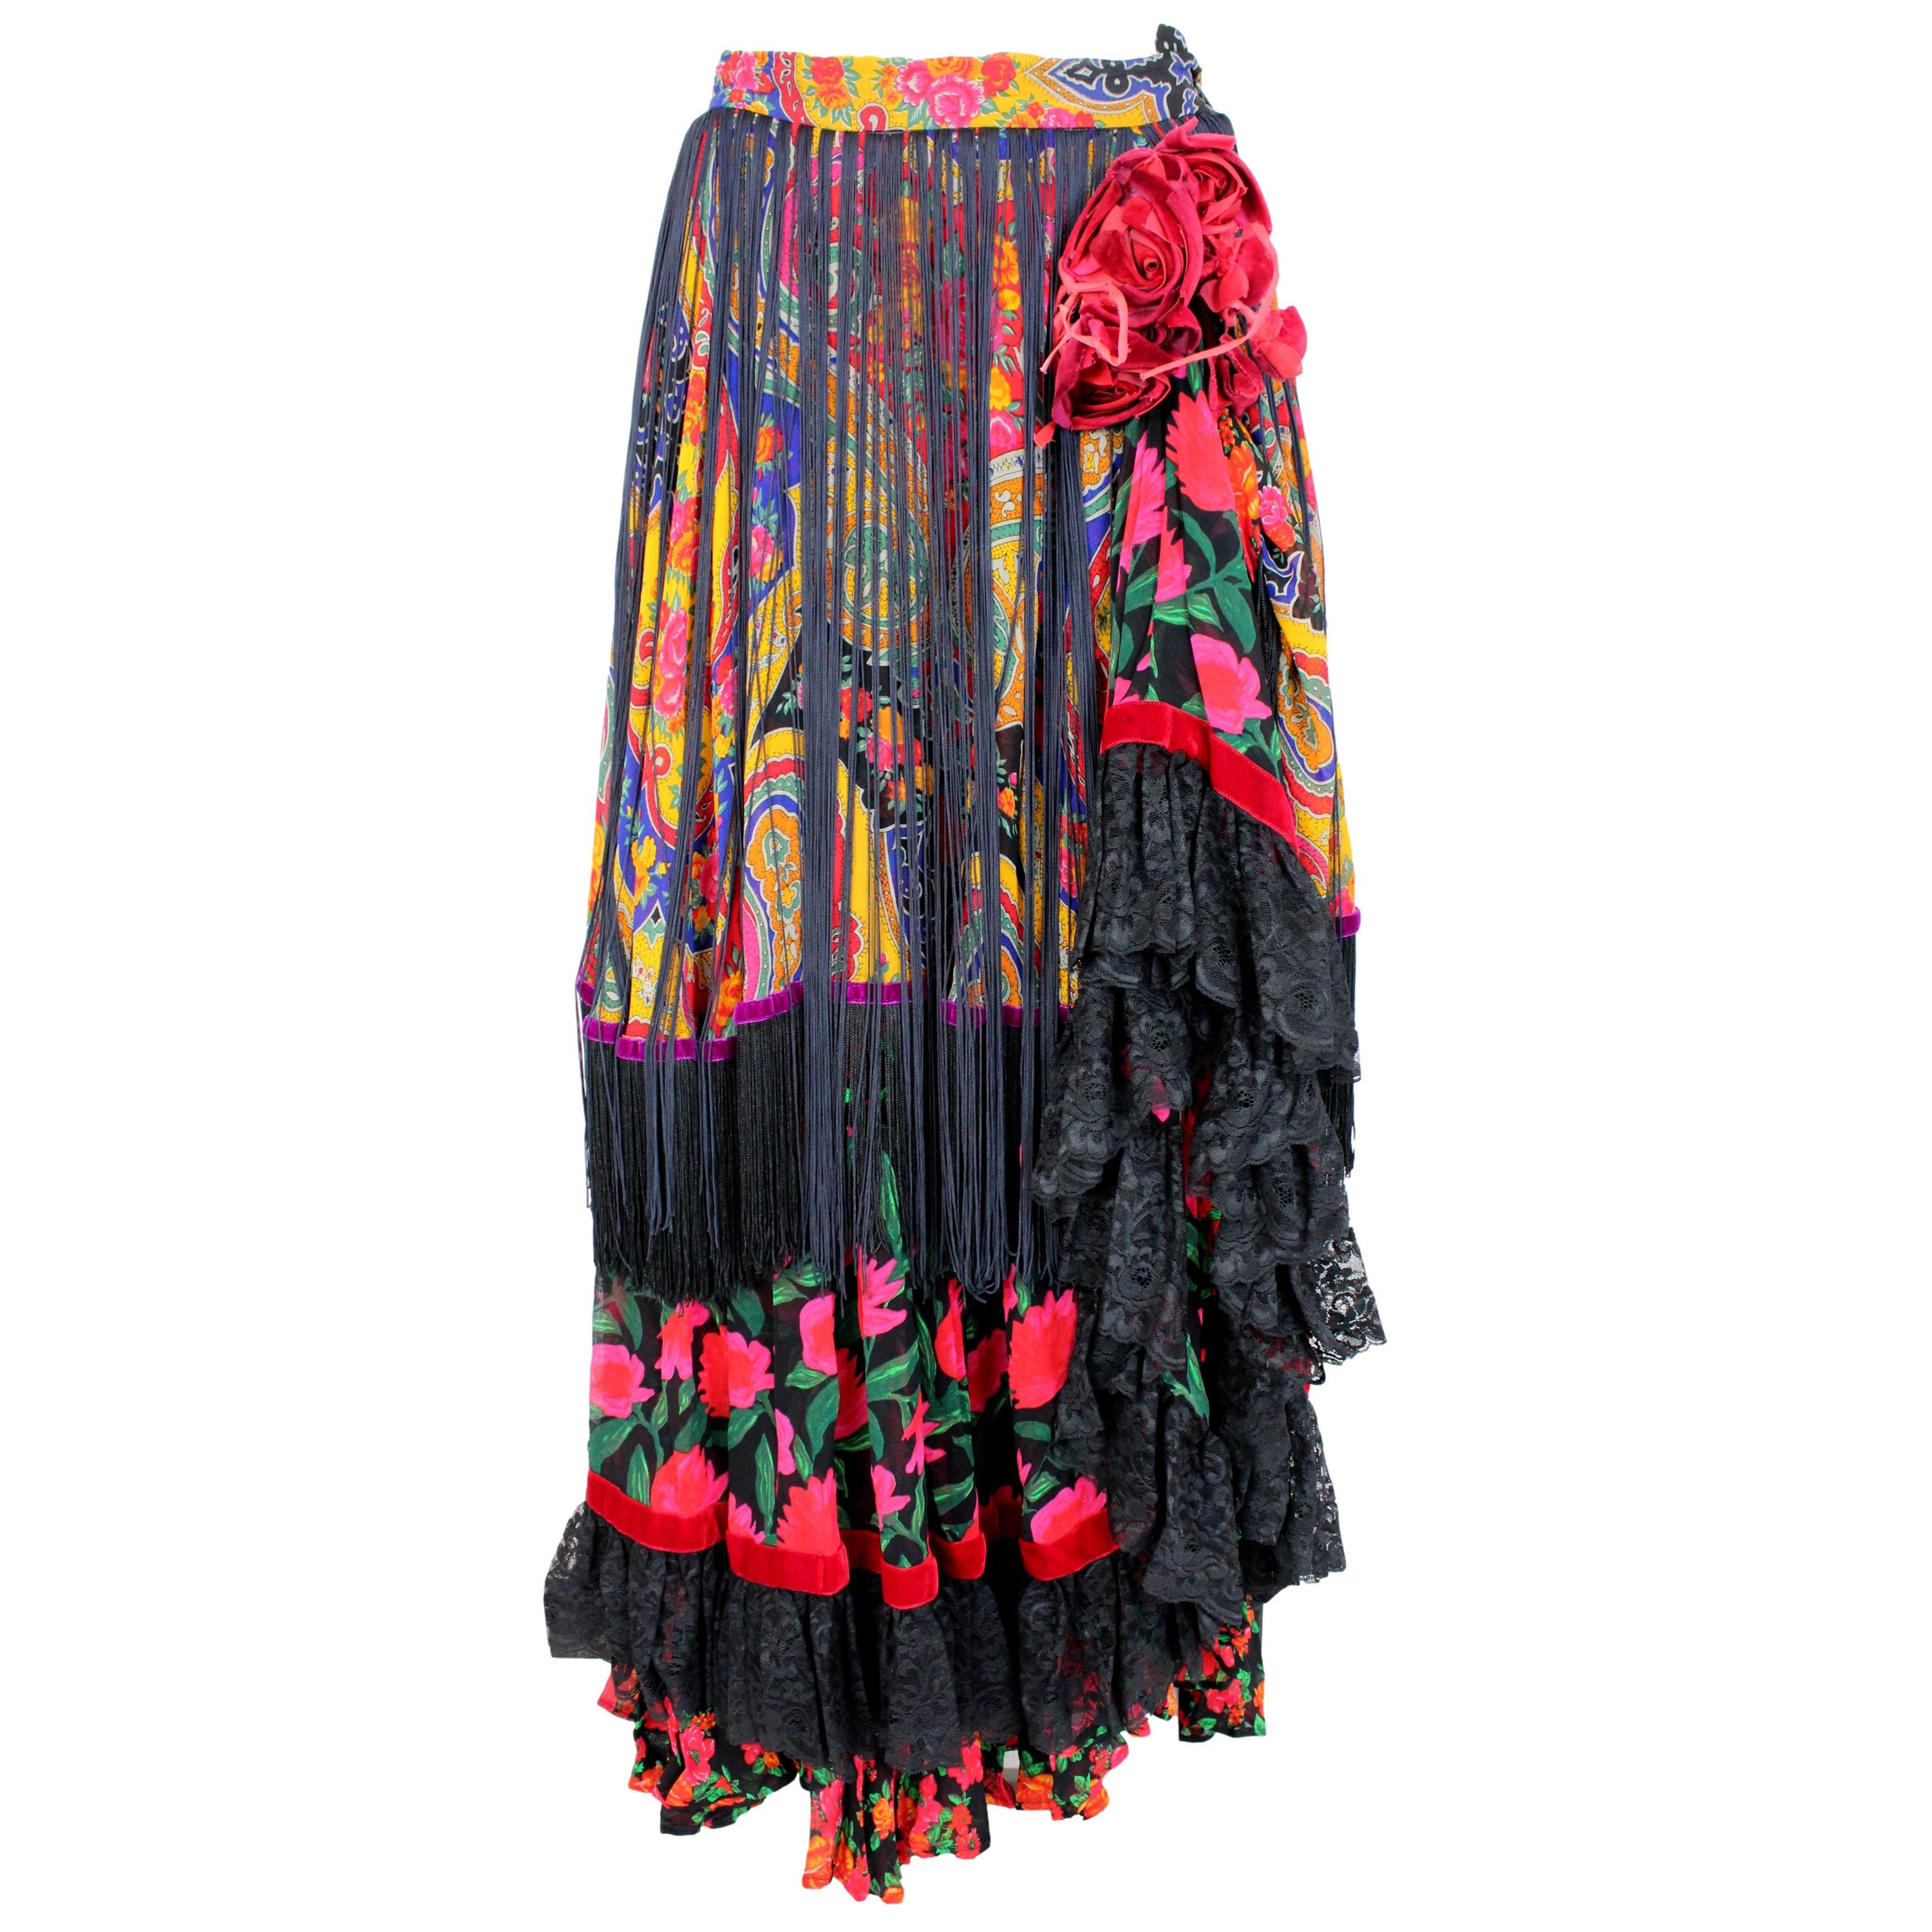 This is an exquisite Dolce & Gabbana skirt from the 2000s haute couture collection. The skirt is crafted from a delicate tulle fabric, featuring an all-over floral print, fringes, and lace detailing. The colors in the floral print are warm and